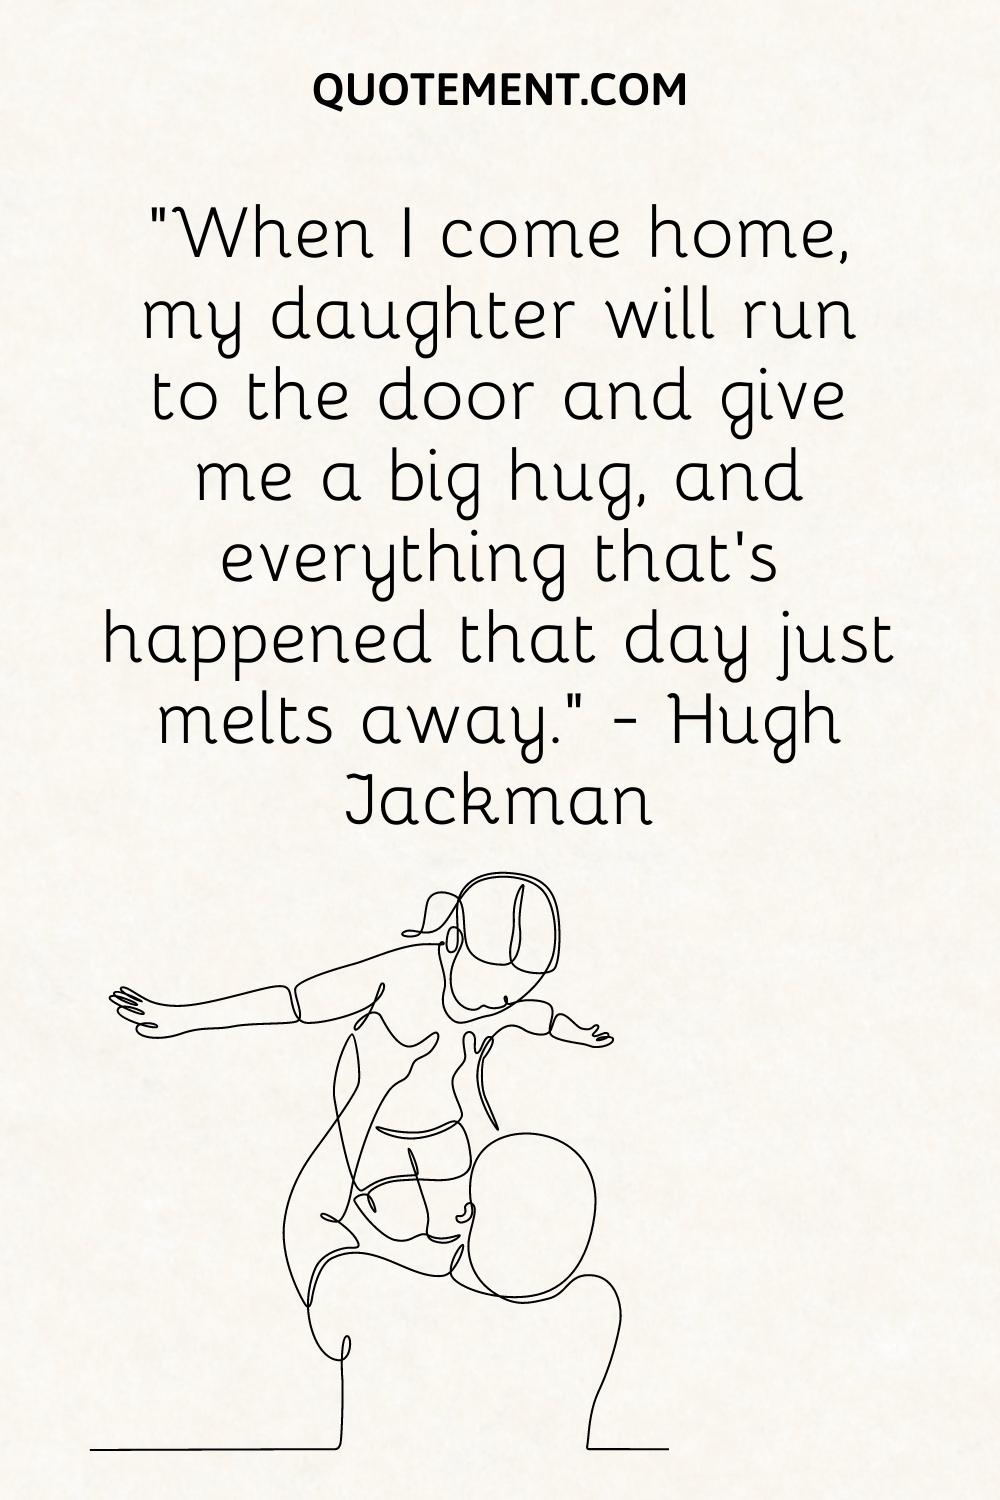 “When I come home, my daughter will run to the door and give me a big hug, and everything that’s happened that day just melts away.” — Hugh Jackman